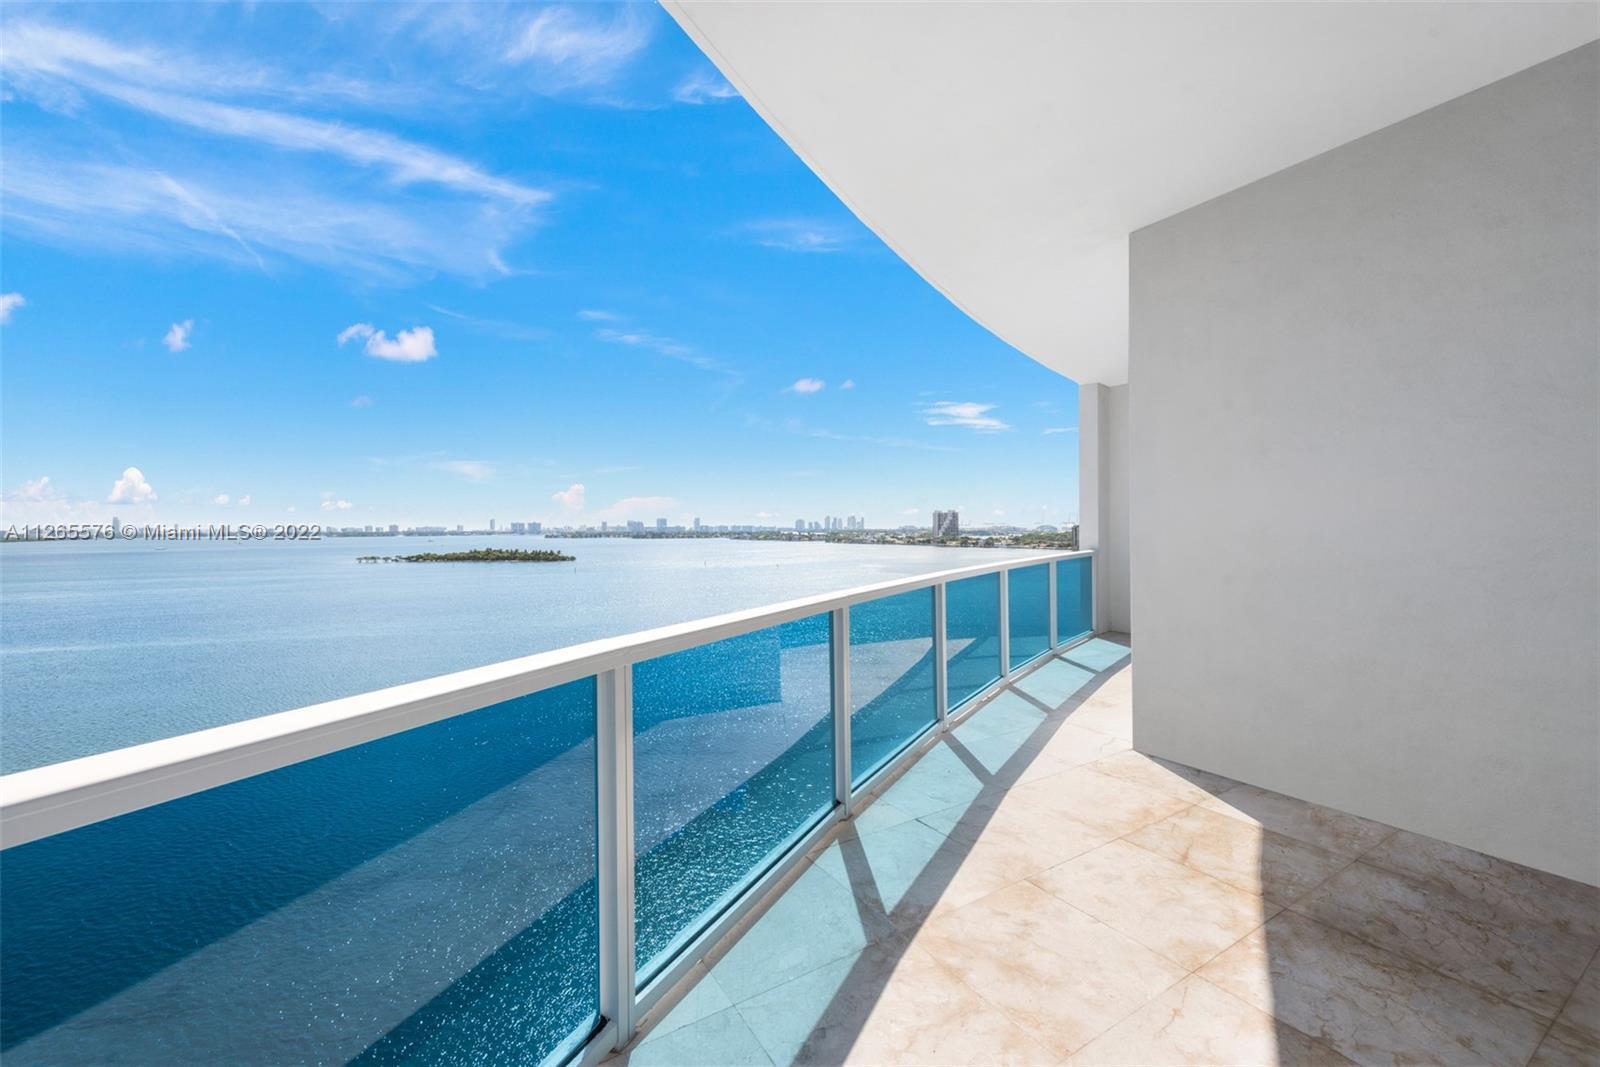 Gorgeous unobstructed Biscayne Bay views from every room! This spacious 2BD, 2BA + den residence off